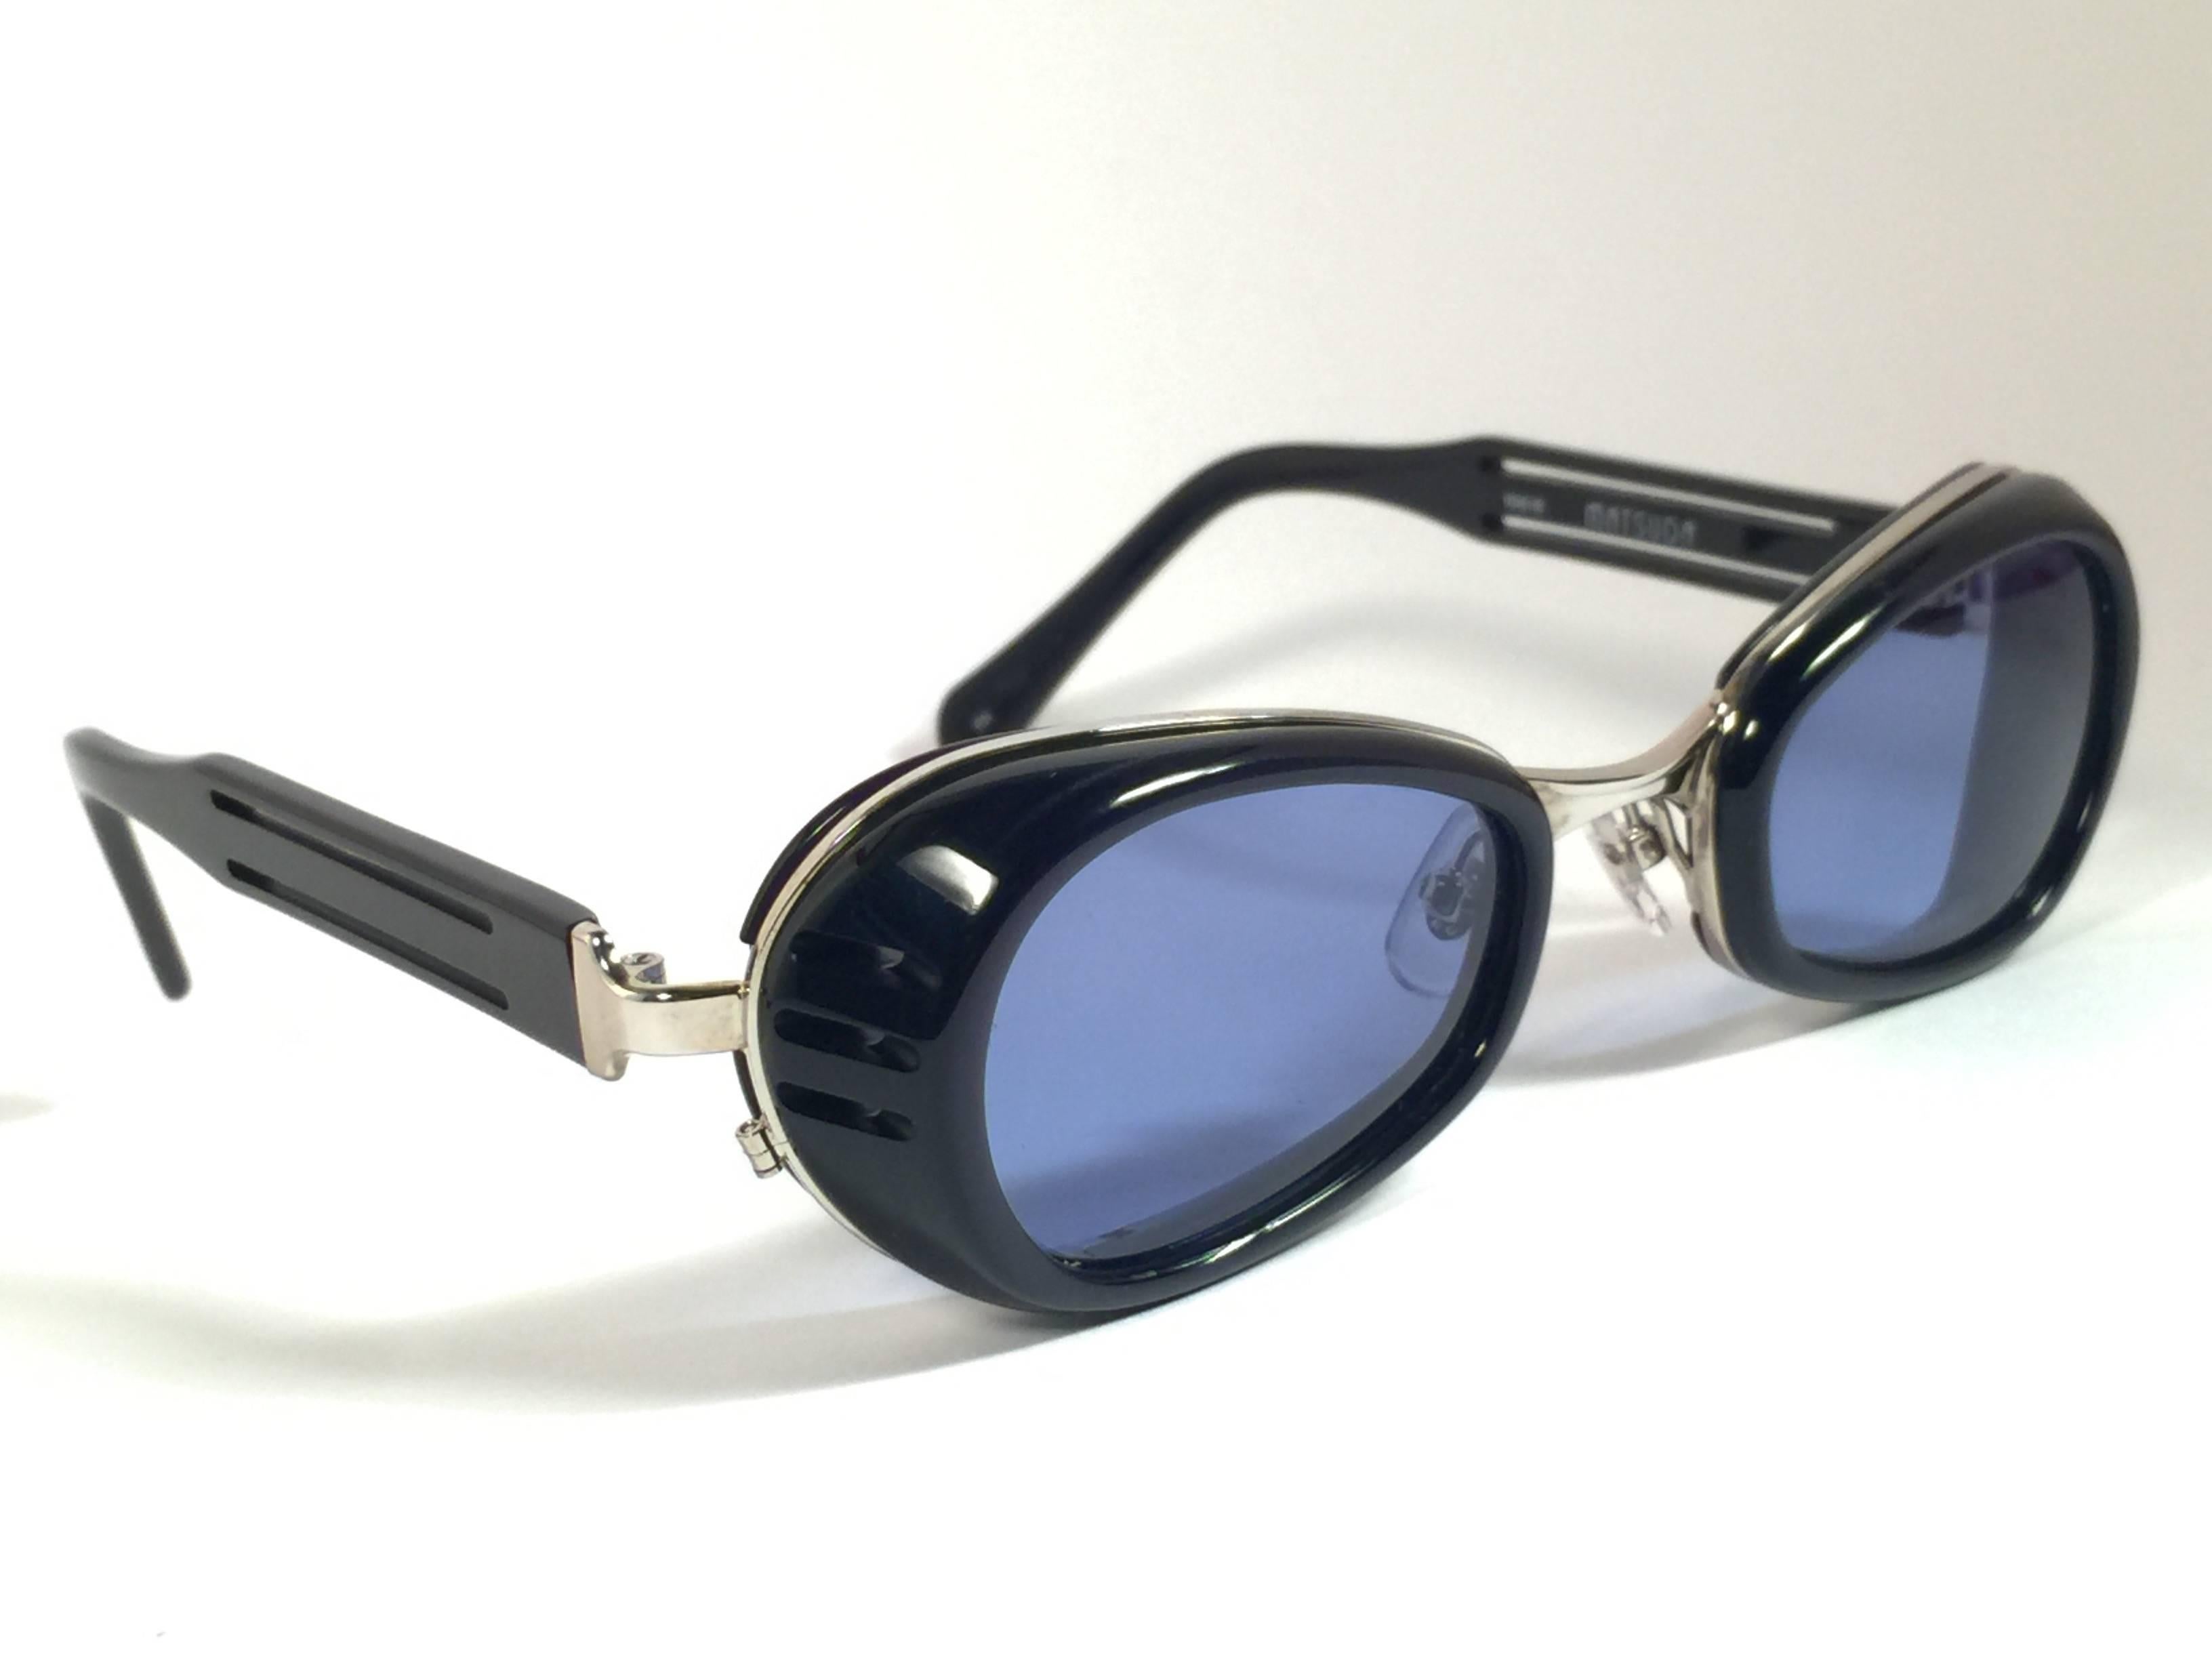 Cult brand Matsuda signed this ultra chic pair of dark blue with silver accents sunglasses. 

Spotless smoke grey lenses.

Superior quality and design. 

New, never worn or displayed. Made in japan.

